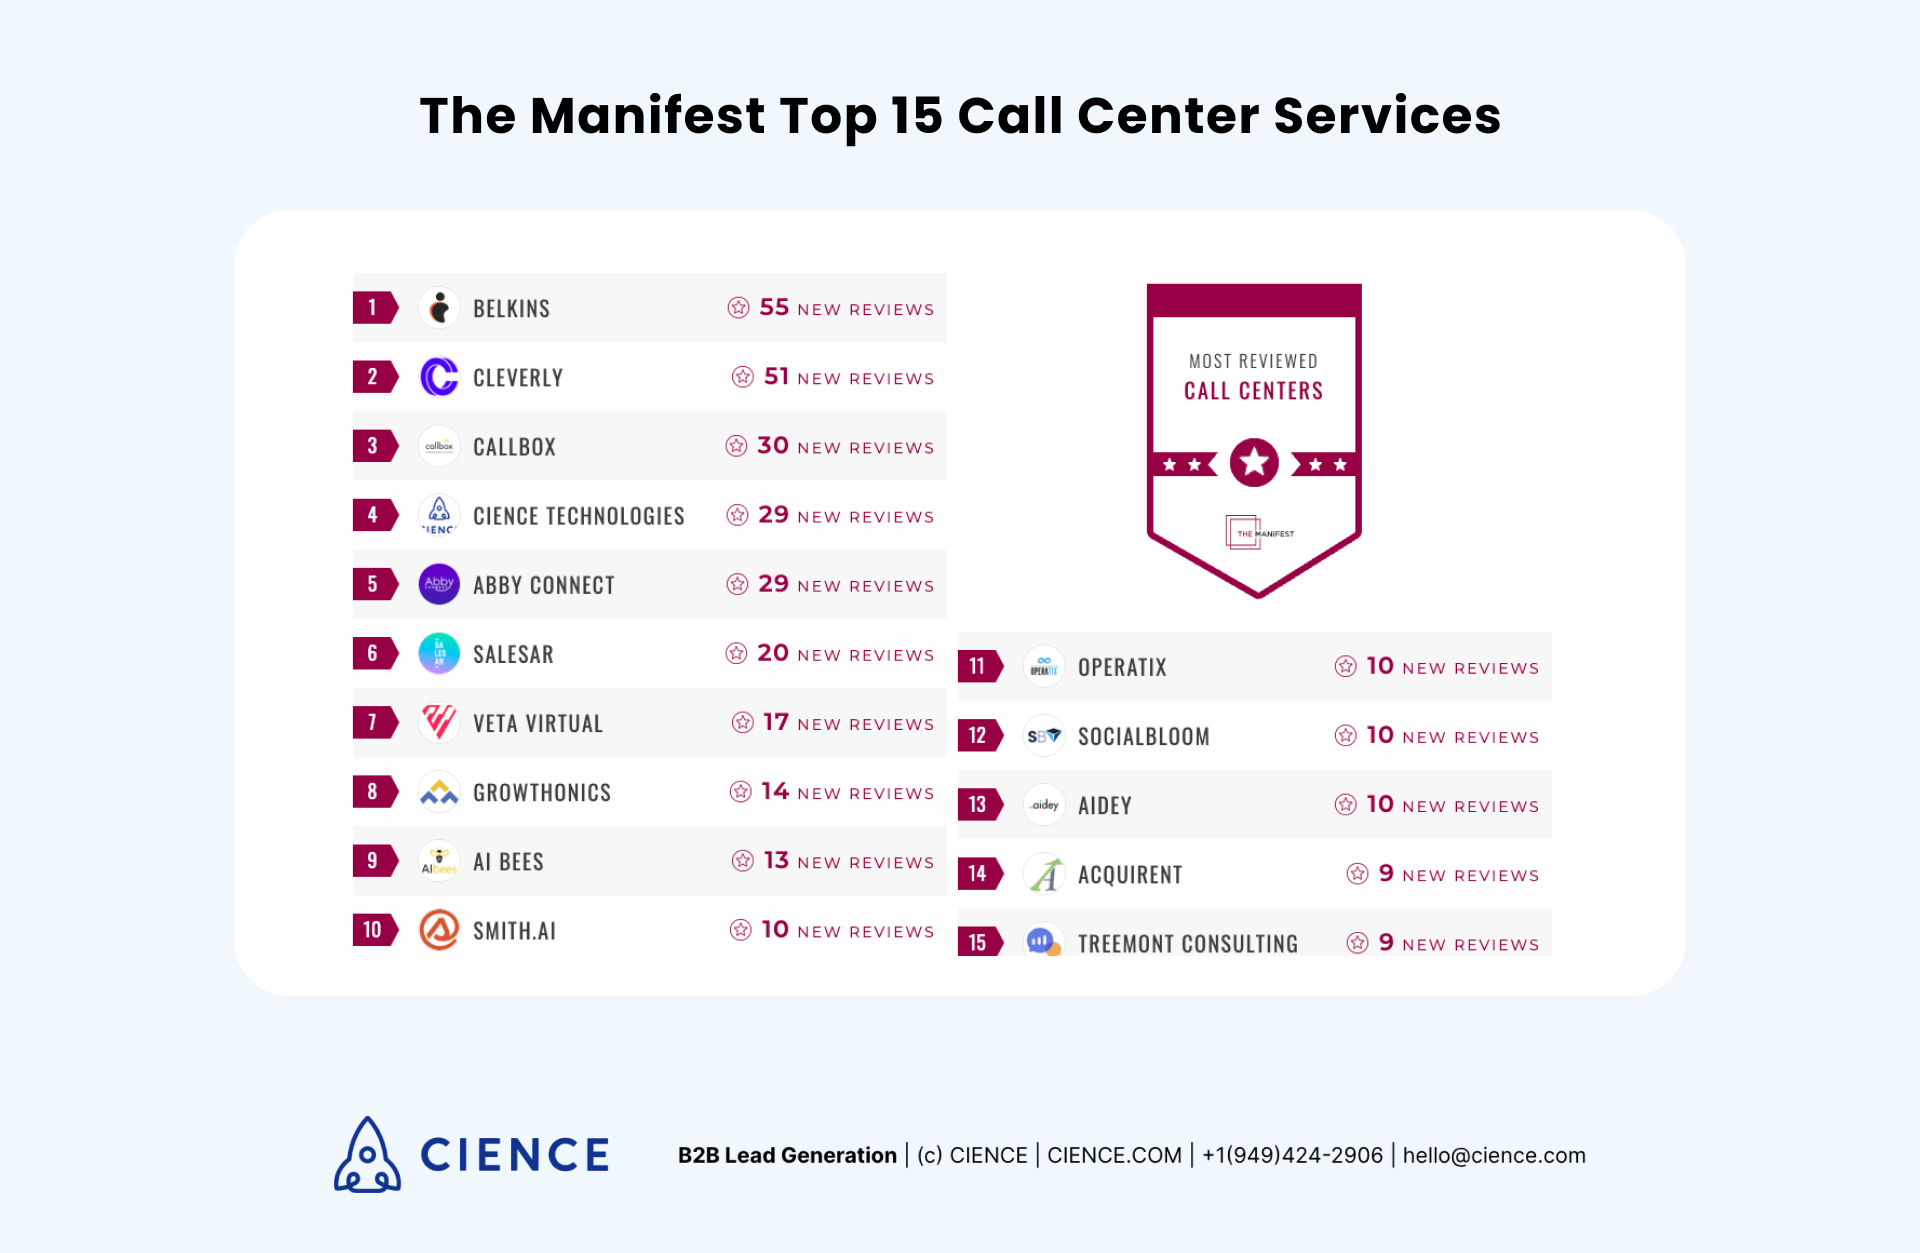 The Manifest Top 15 Call Center Services